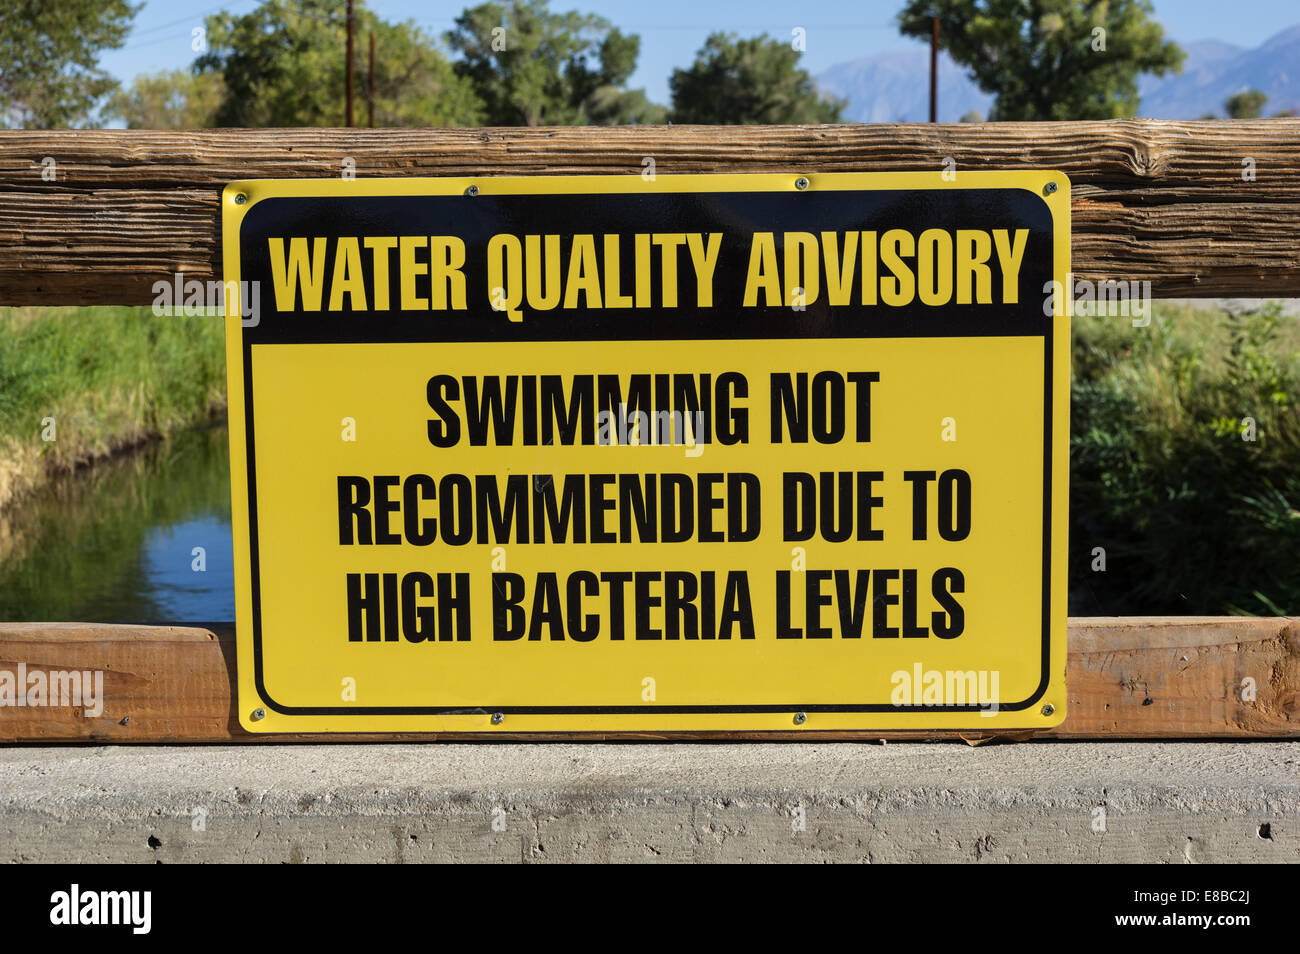 water quality advisory sign warning against swimming due to high bacteria levels Stock Photo